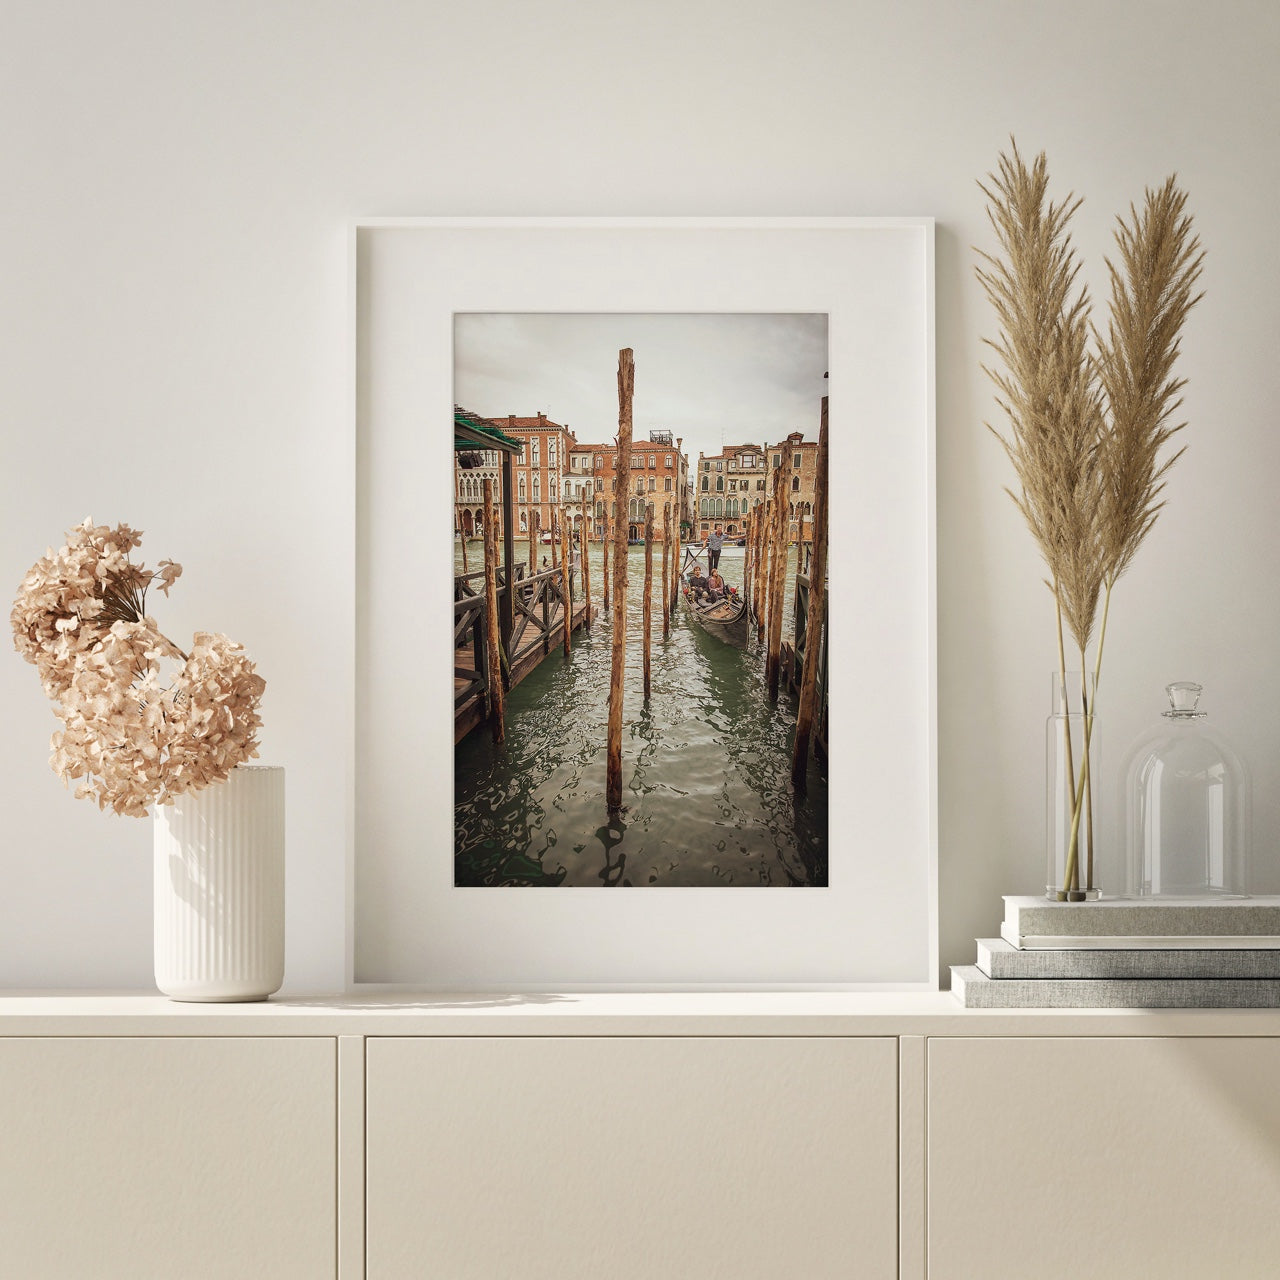 Framed matted print of Italy